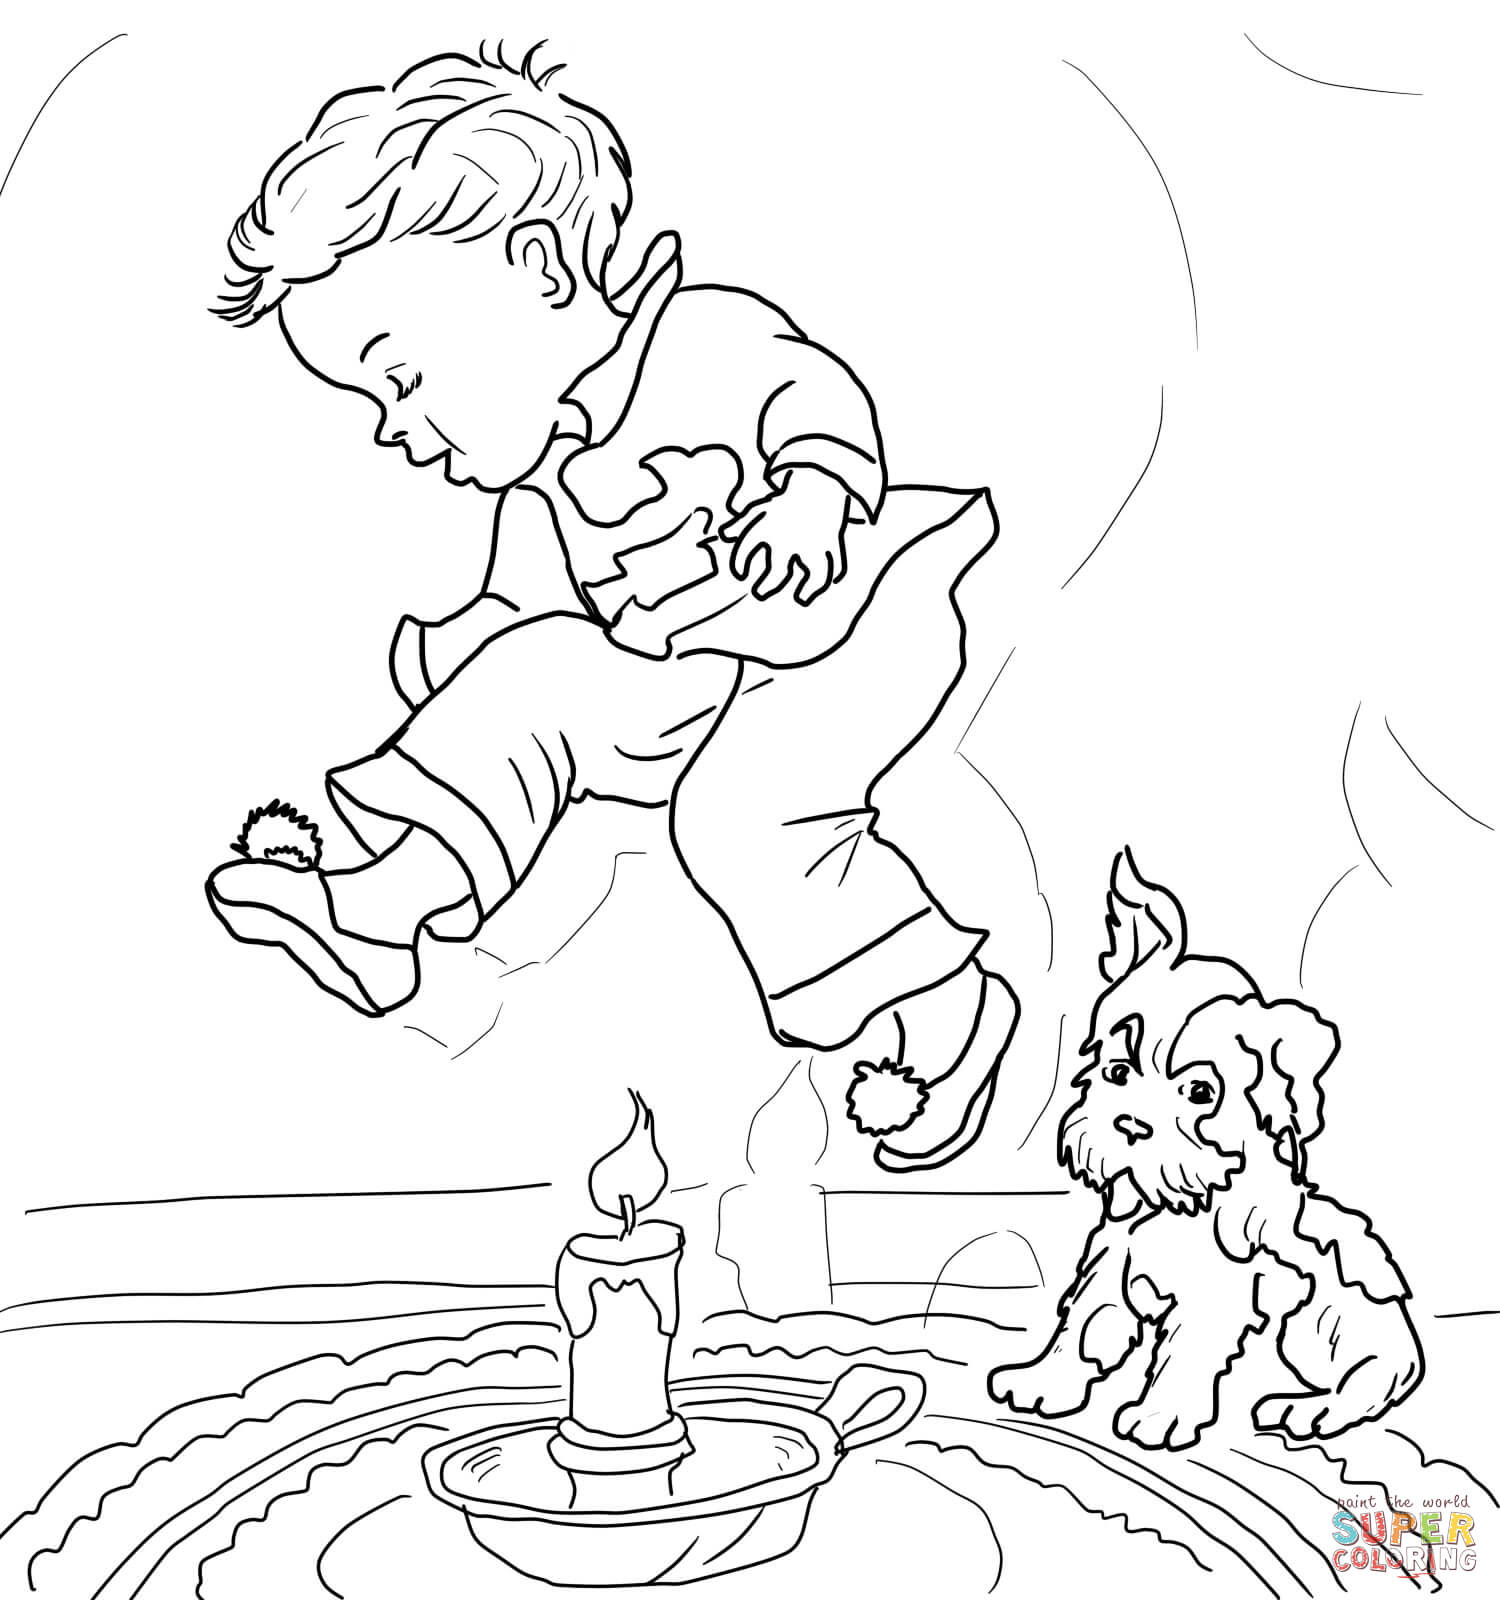 Mother Goose Nursery Rhymes Coloring Pages | Free Coloring Pages - Mother Goose Coloring Pages Free Printable